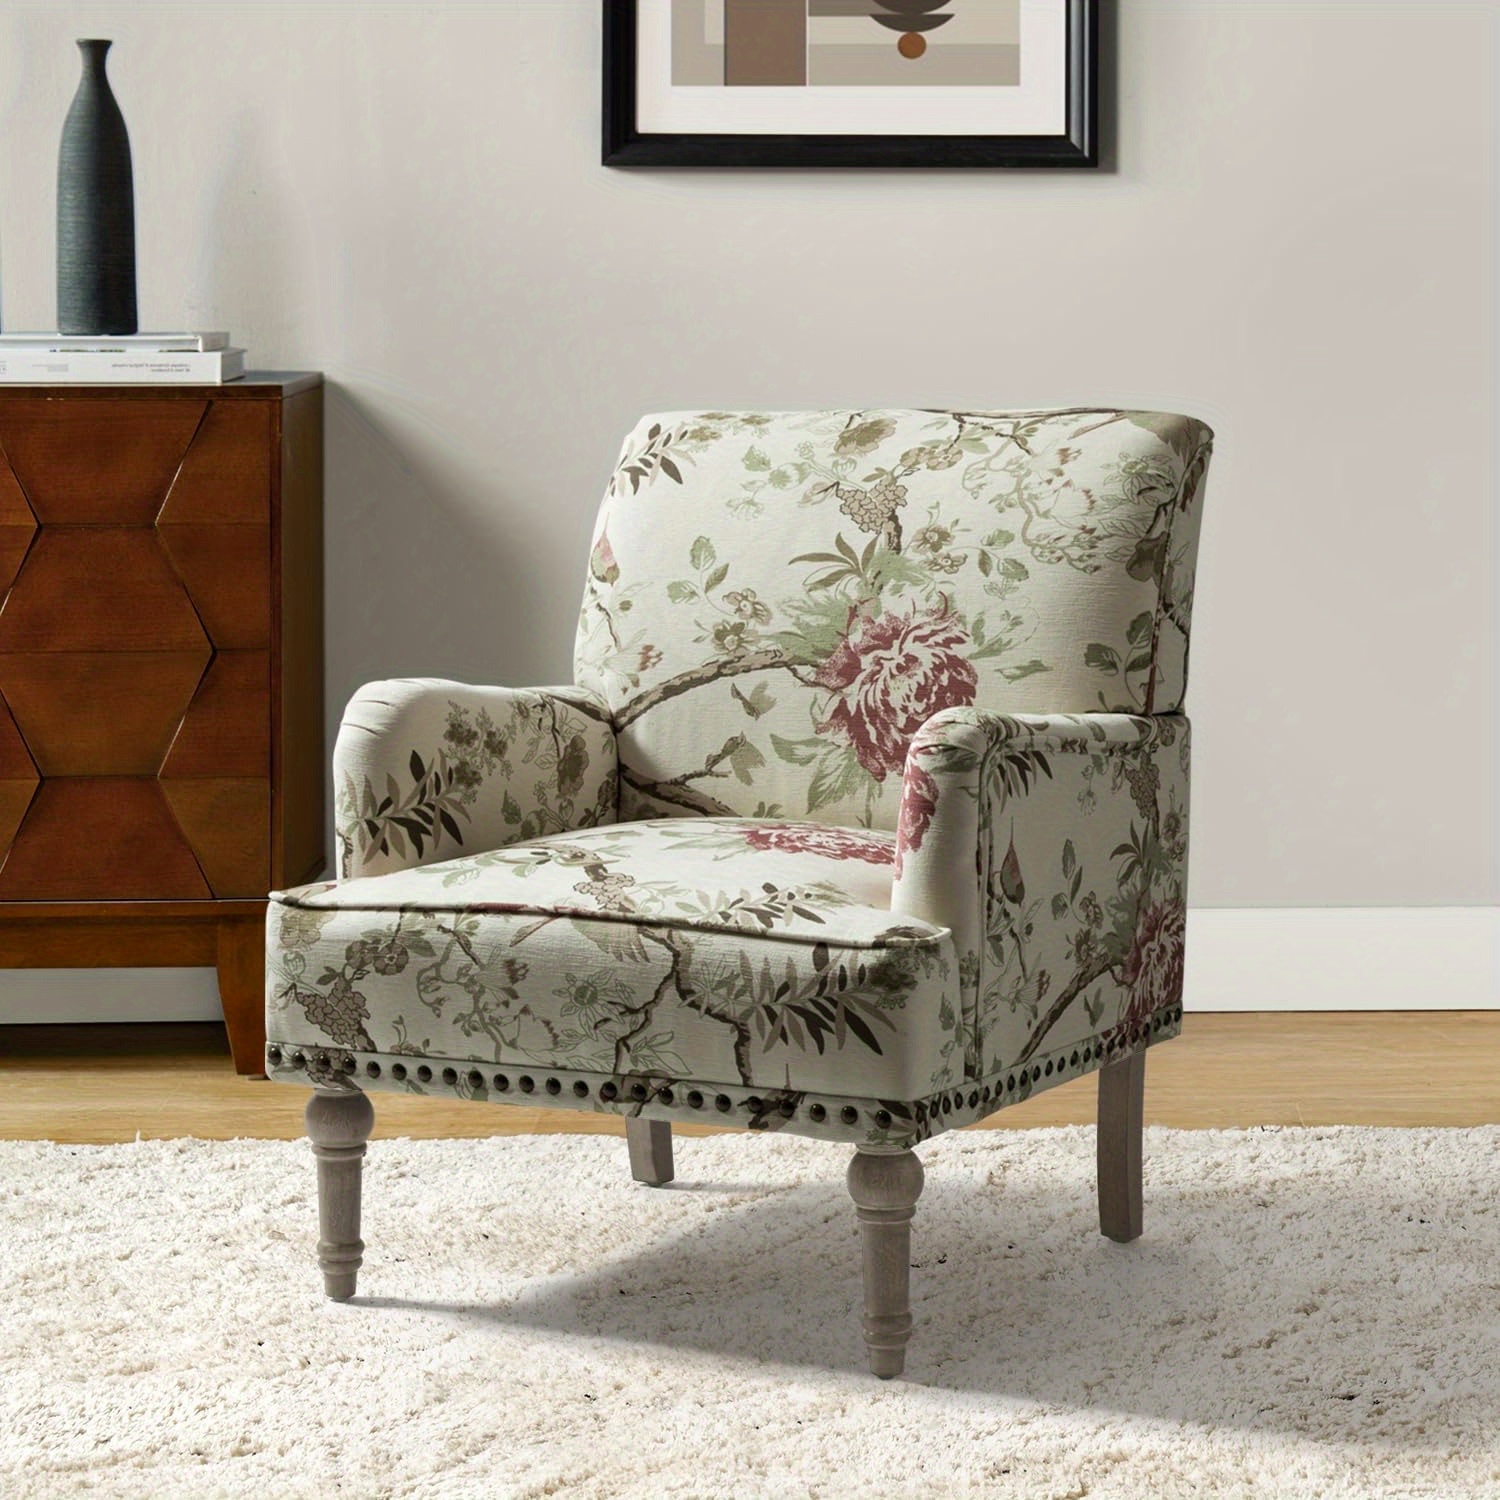 

Modern Armchair With Wooden Legs & Nailhead Trim, Comfy Upholstered Accent Chair For Living Room Bedroom (floral Patterns, Floral)